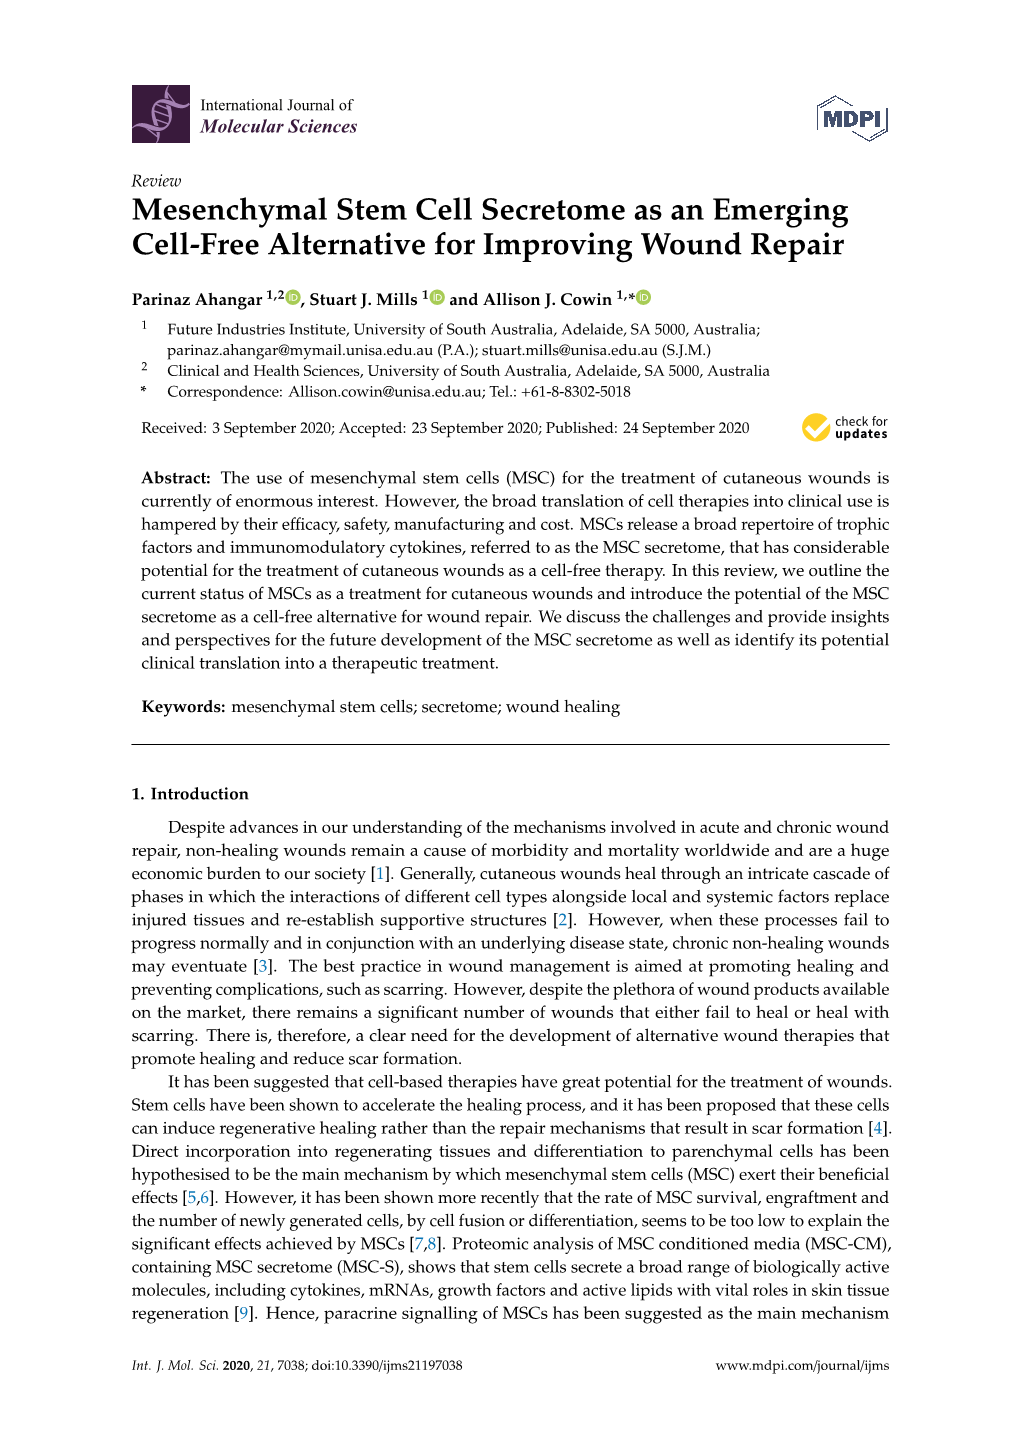 Mesenchymal Stem Cell Secretome As an Emerging Cell-Free Alternative for Improving Wound Repair